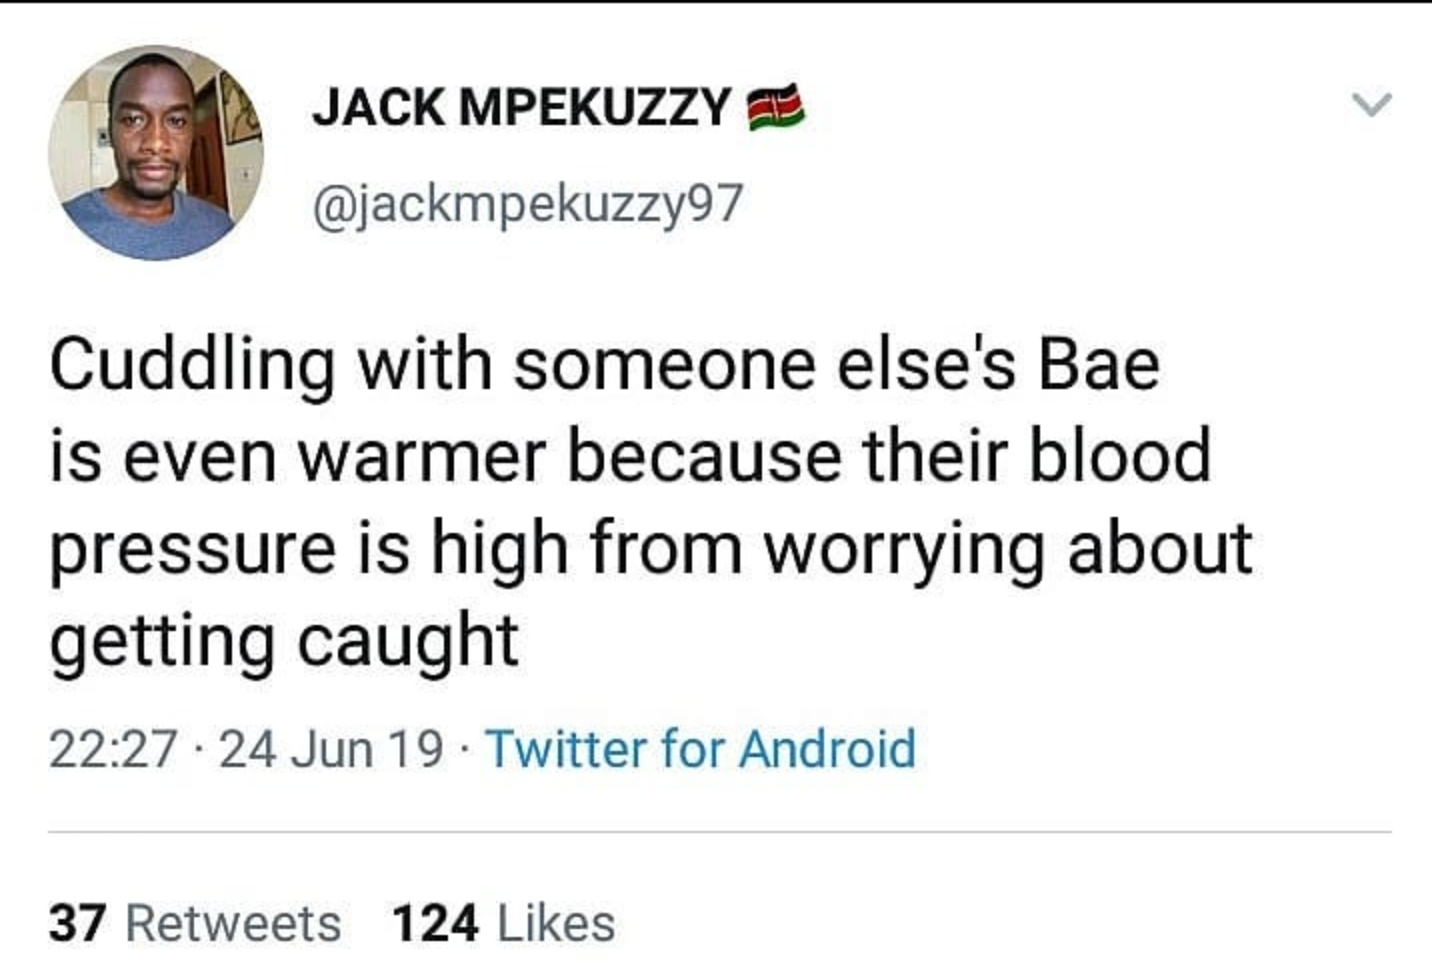 black twitter - Jack Mpekuzzy E Cuddling with someone else's Bae is even warmer because their blood pressure is high from worrying about getting caught